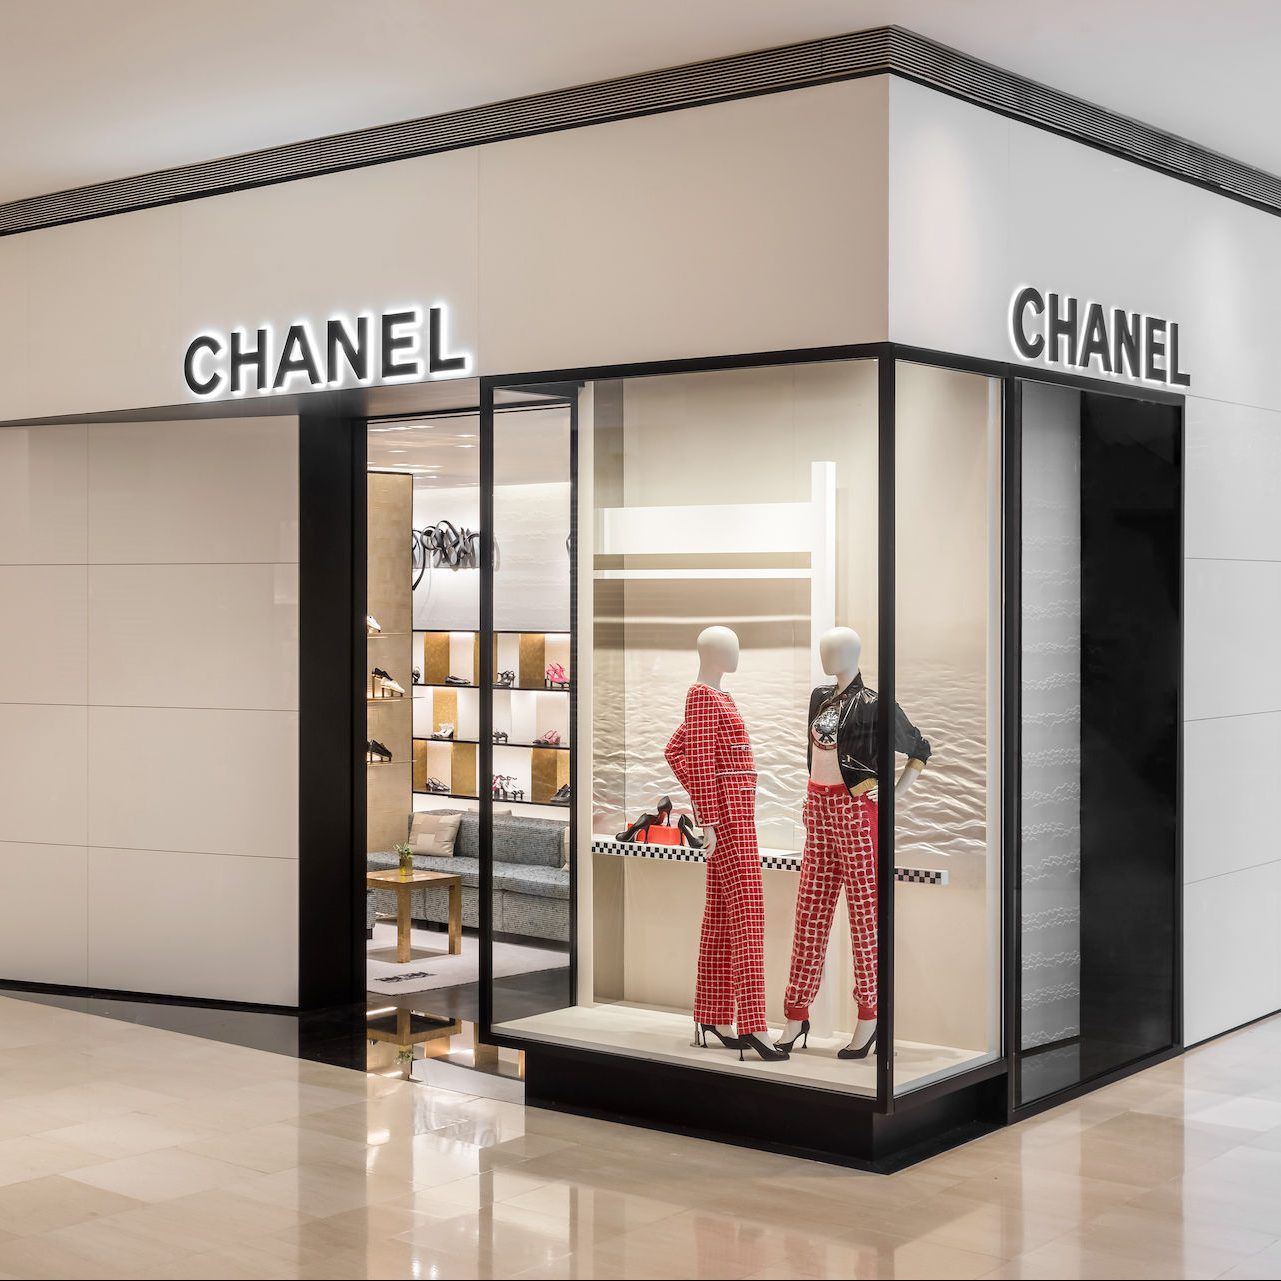 CHANEL Stores in Australia and New Zealand  Fragrance  Beauty  CHANEL